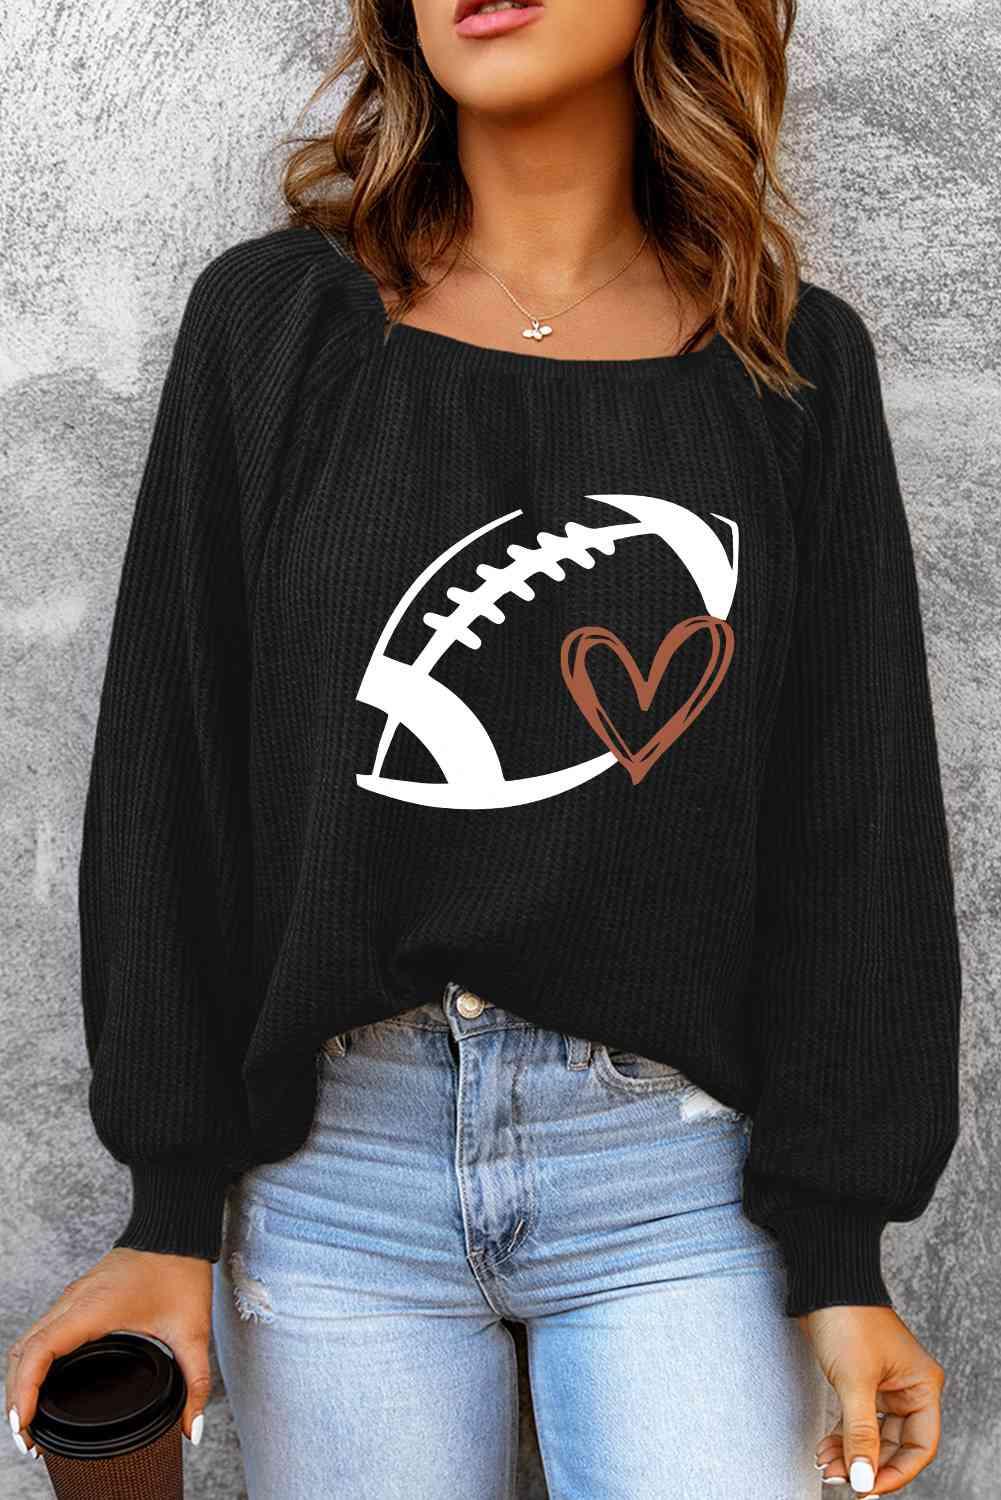 a woman wearing a black sweater with a football on it